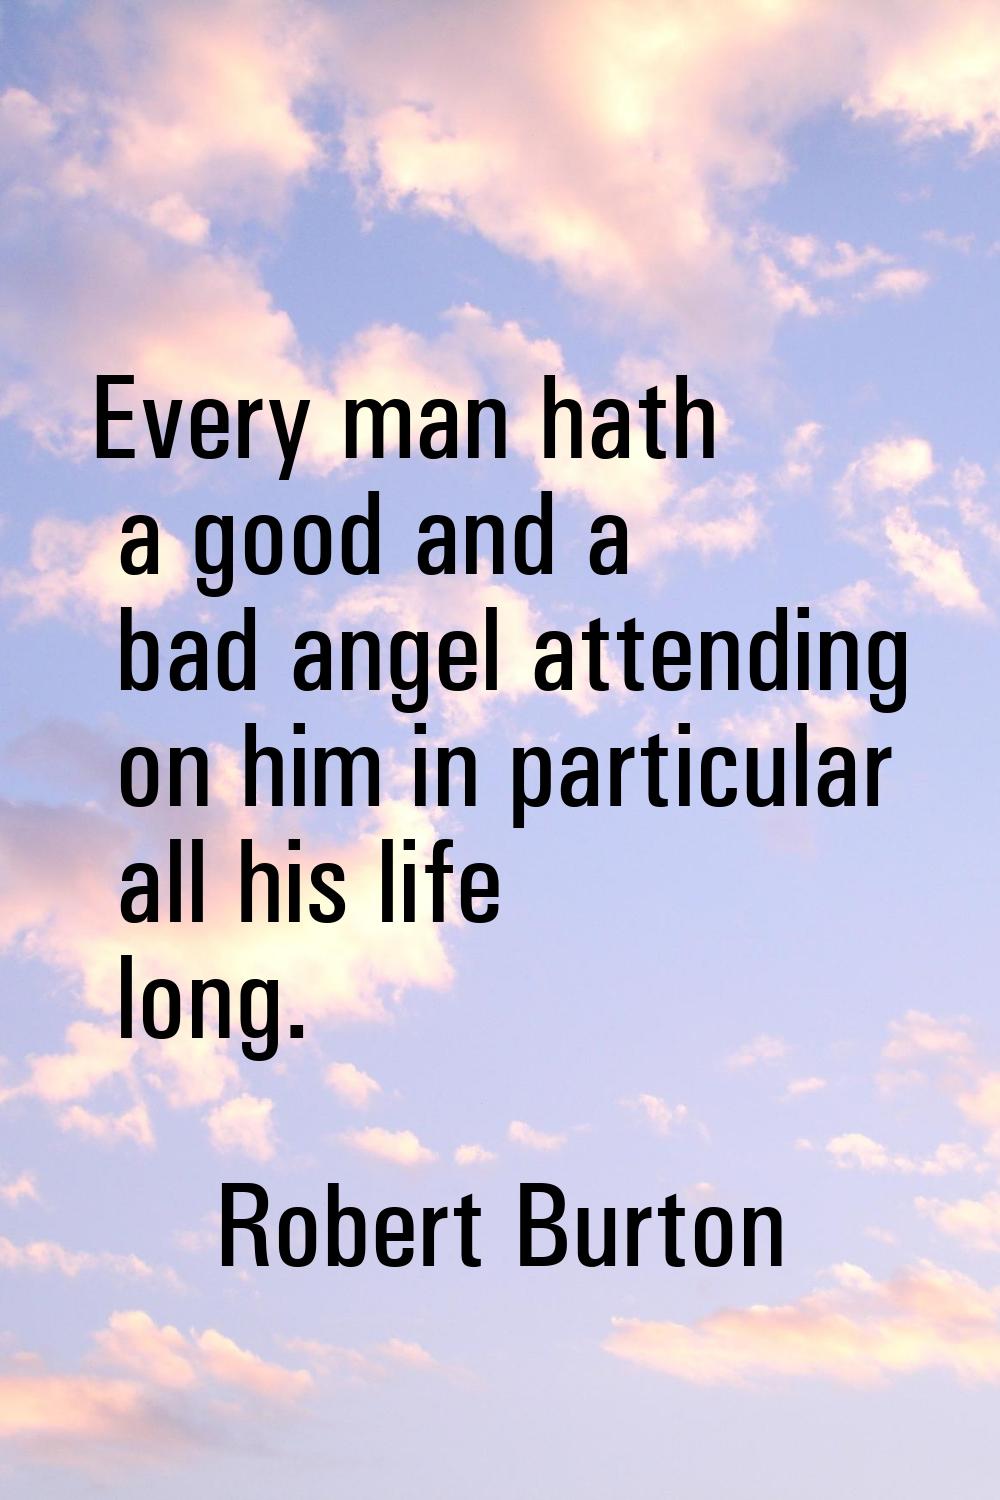 Every man hath a good and a bad angel attending on him in particular all his life long.